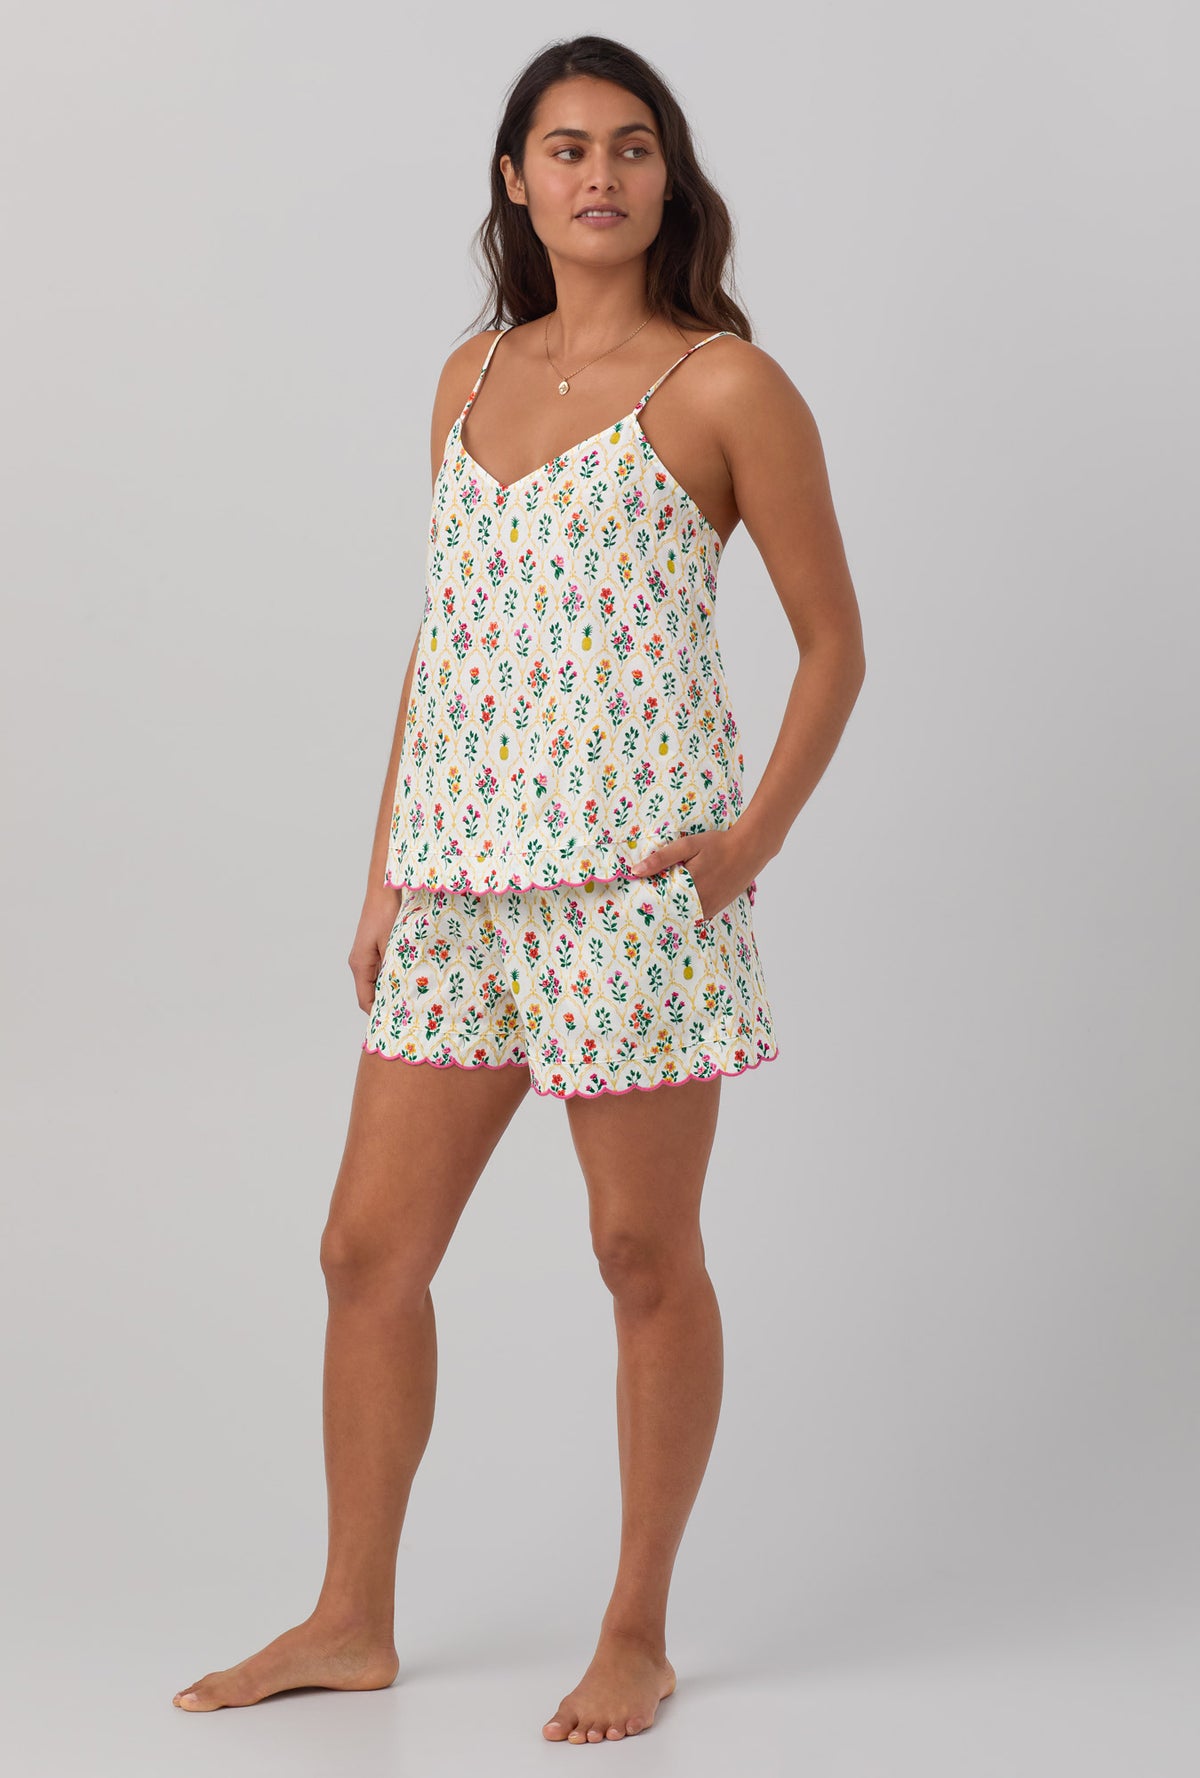 A lady wearing Scallop Cami Woven Cotton Poplin Shorty PJ Set with darling floral print